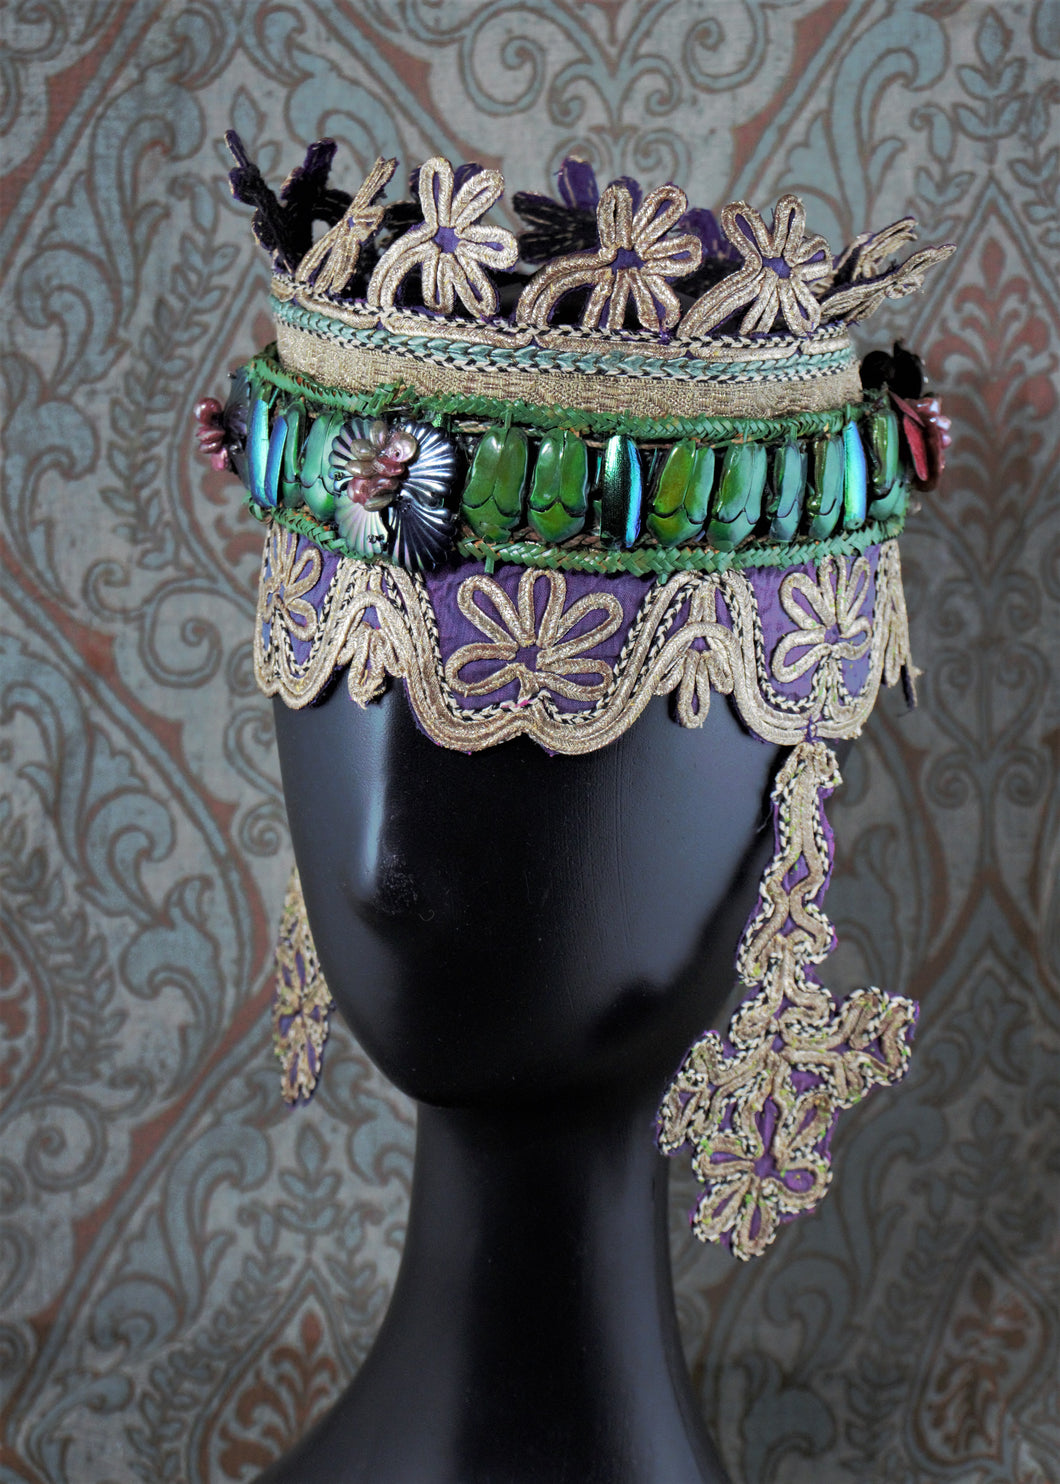 Front view of Lady of Shallot headdress decorated with iridescent bug carapaces and floral 